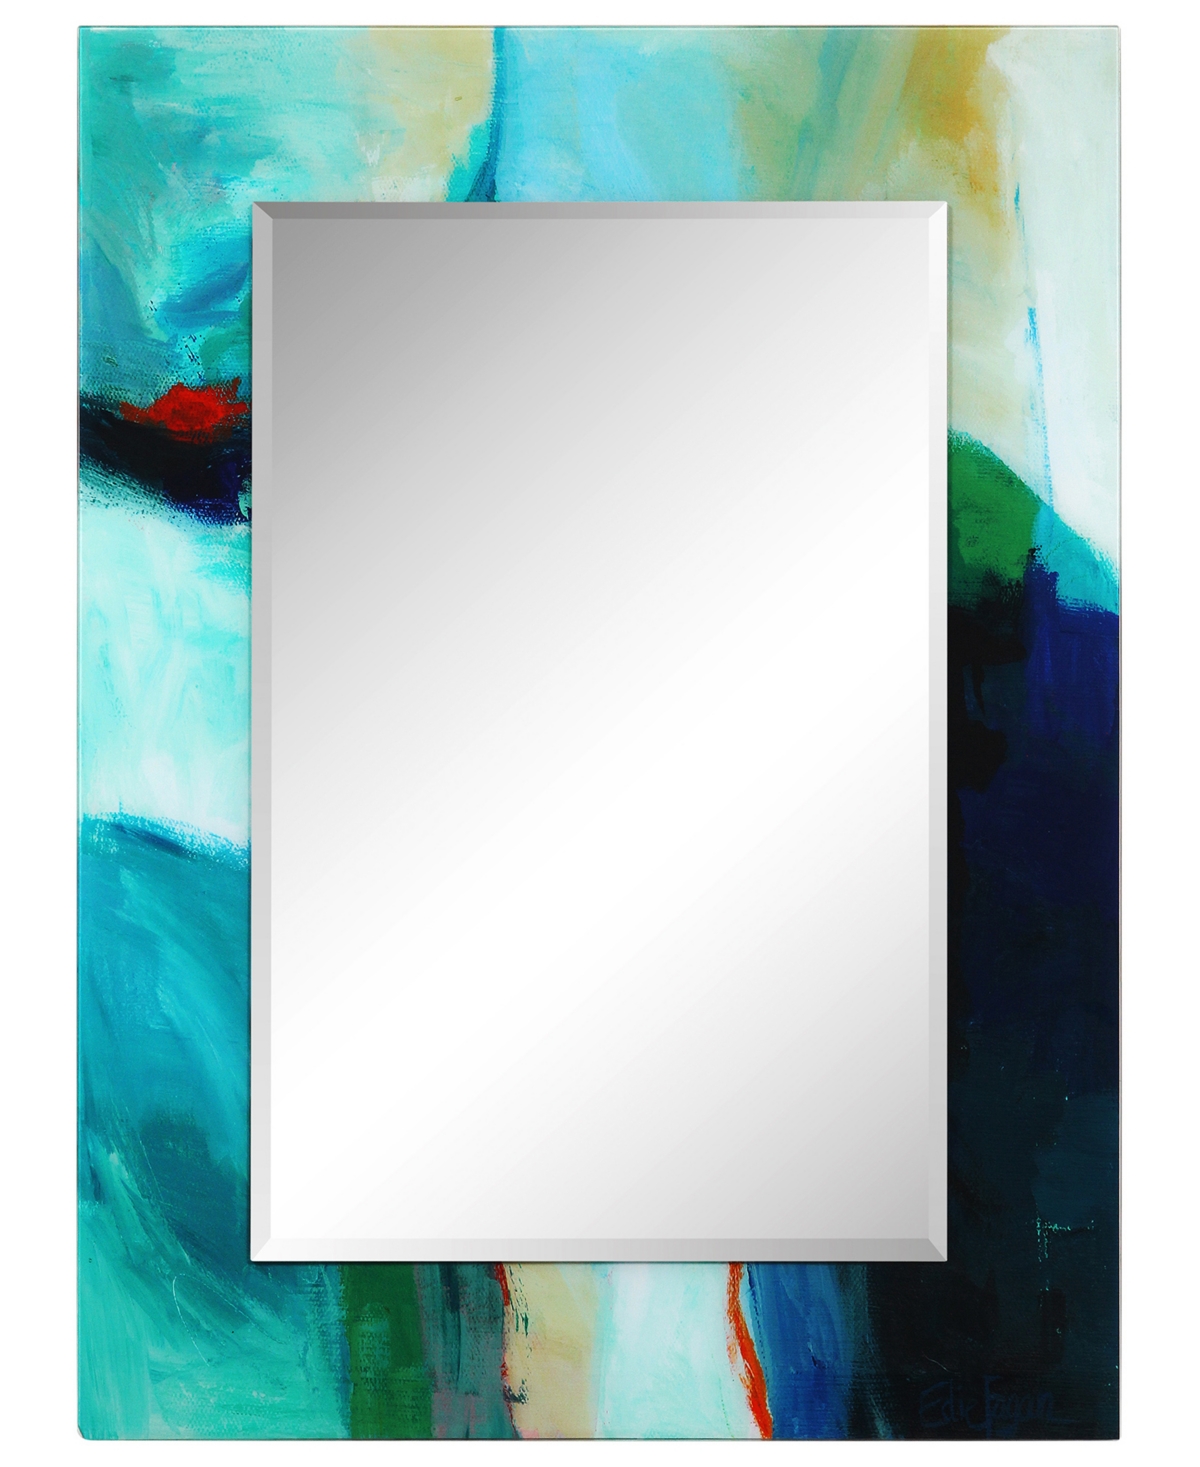 Reverse Printed Tempered Art Glass with Rectangular Beveled Mirror Wall Decor - 48" x 36'' - Multi